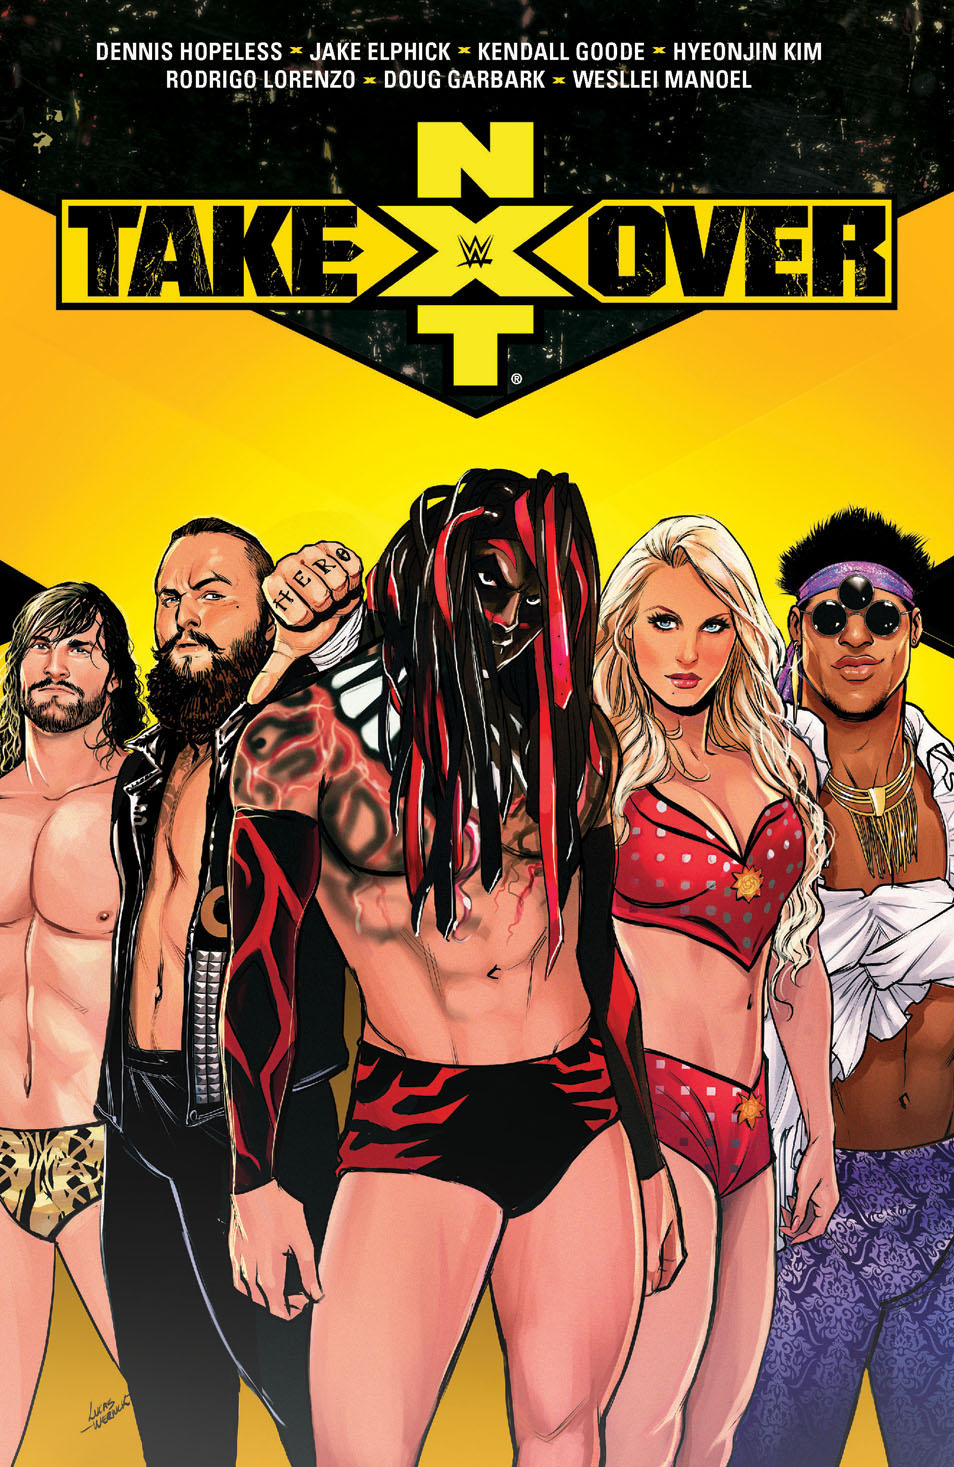 This image is the cover for the book WWE: NXT Takeover, WWE